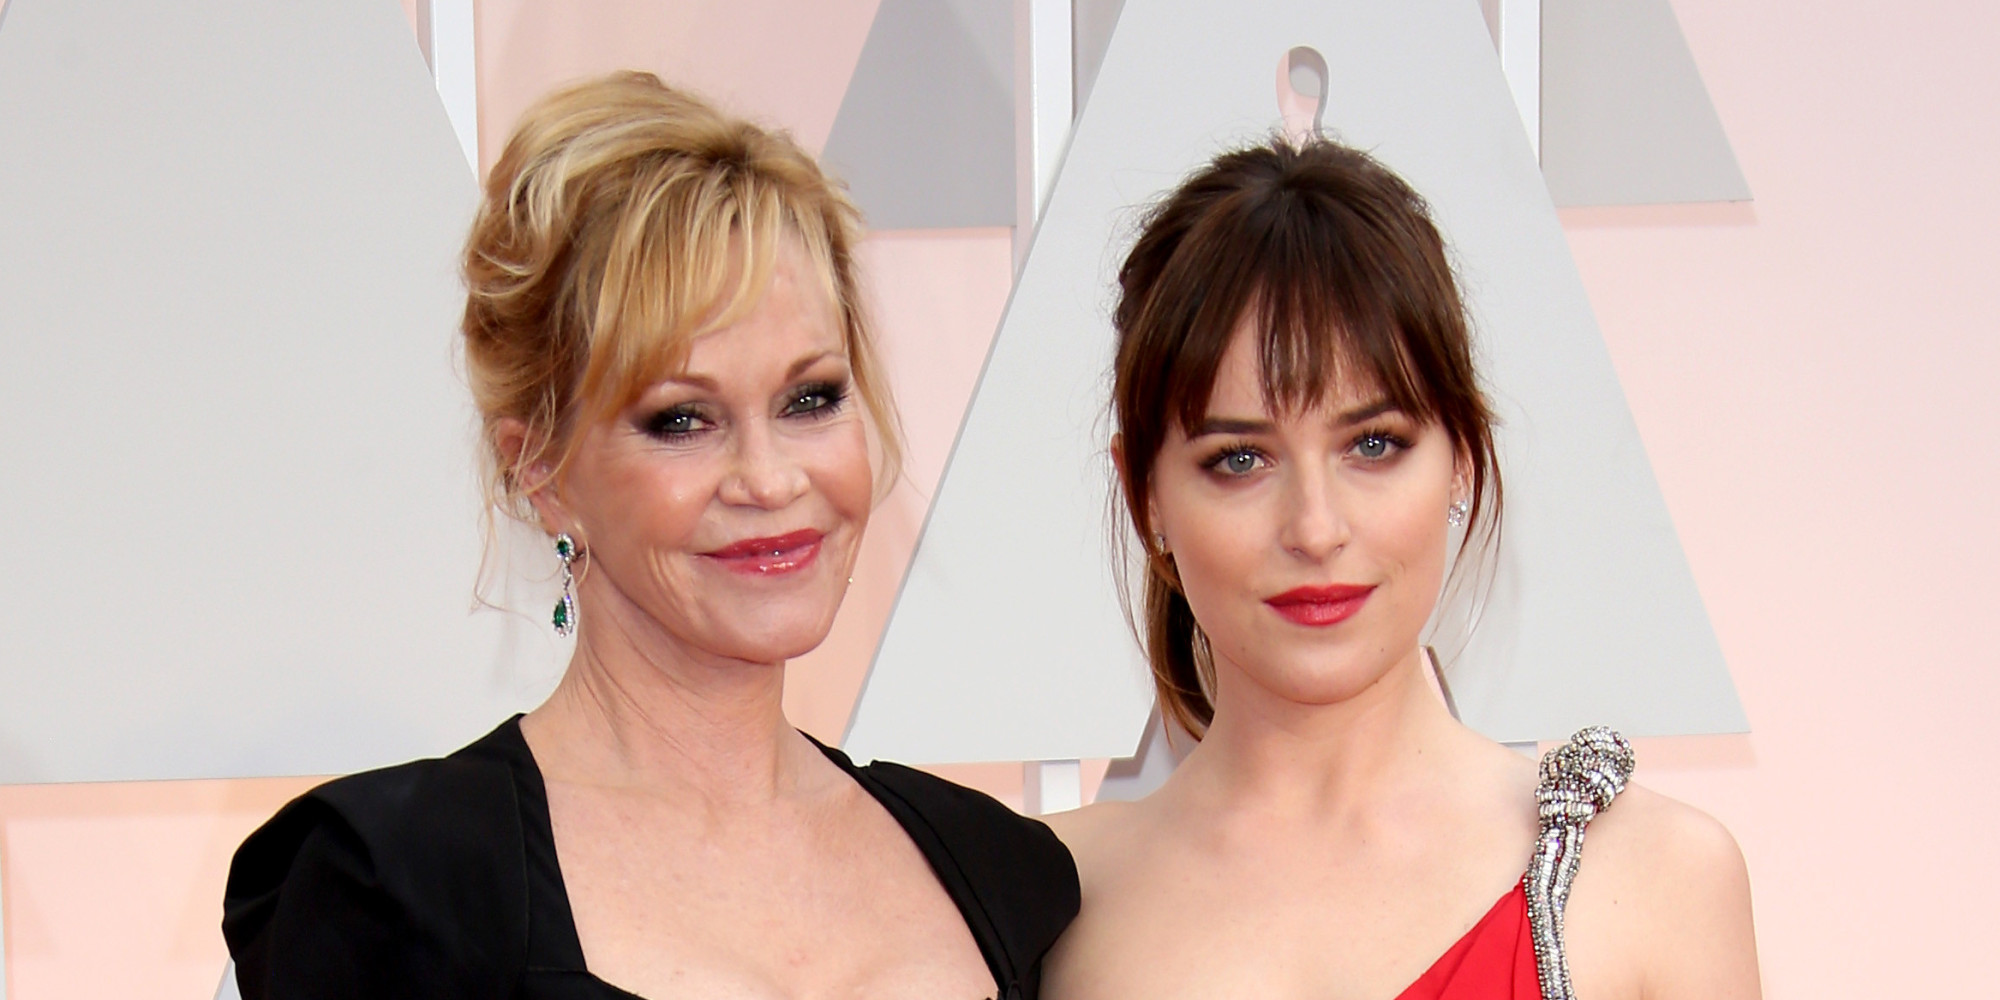 HOLLYWOOD, CA - FEBRUARY 22: (L-R) Melanie Griffith and Dakota Johnson arrive at the 87th Annual Academy Awards at Hollywood & Highland Center on February 22, 2015 in Los Angeles, California. (Photo by Dan MacMedan/WireImage)